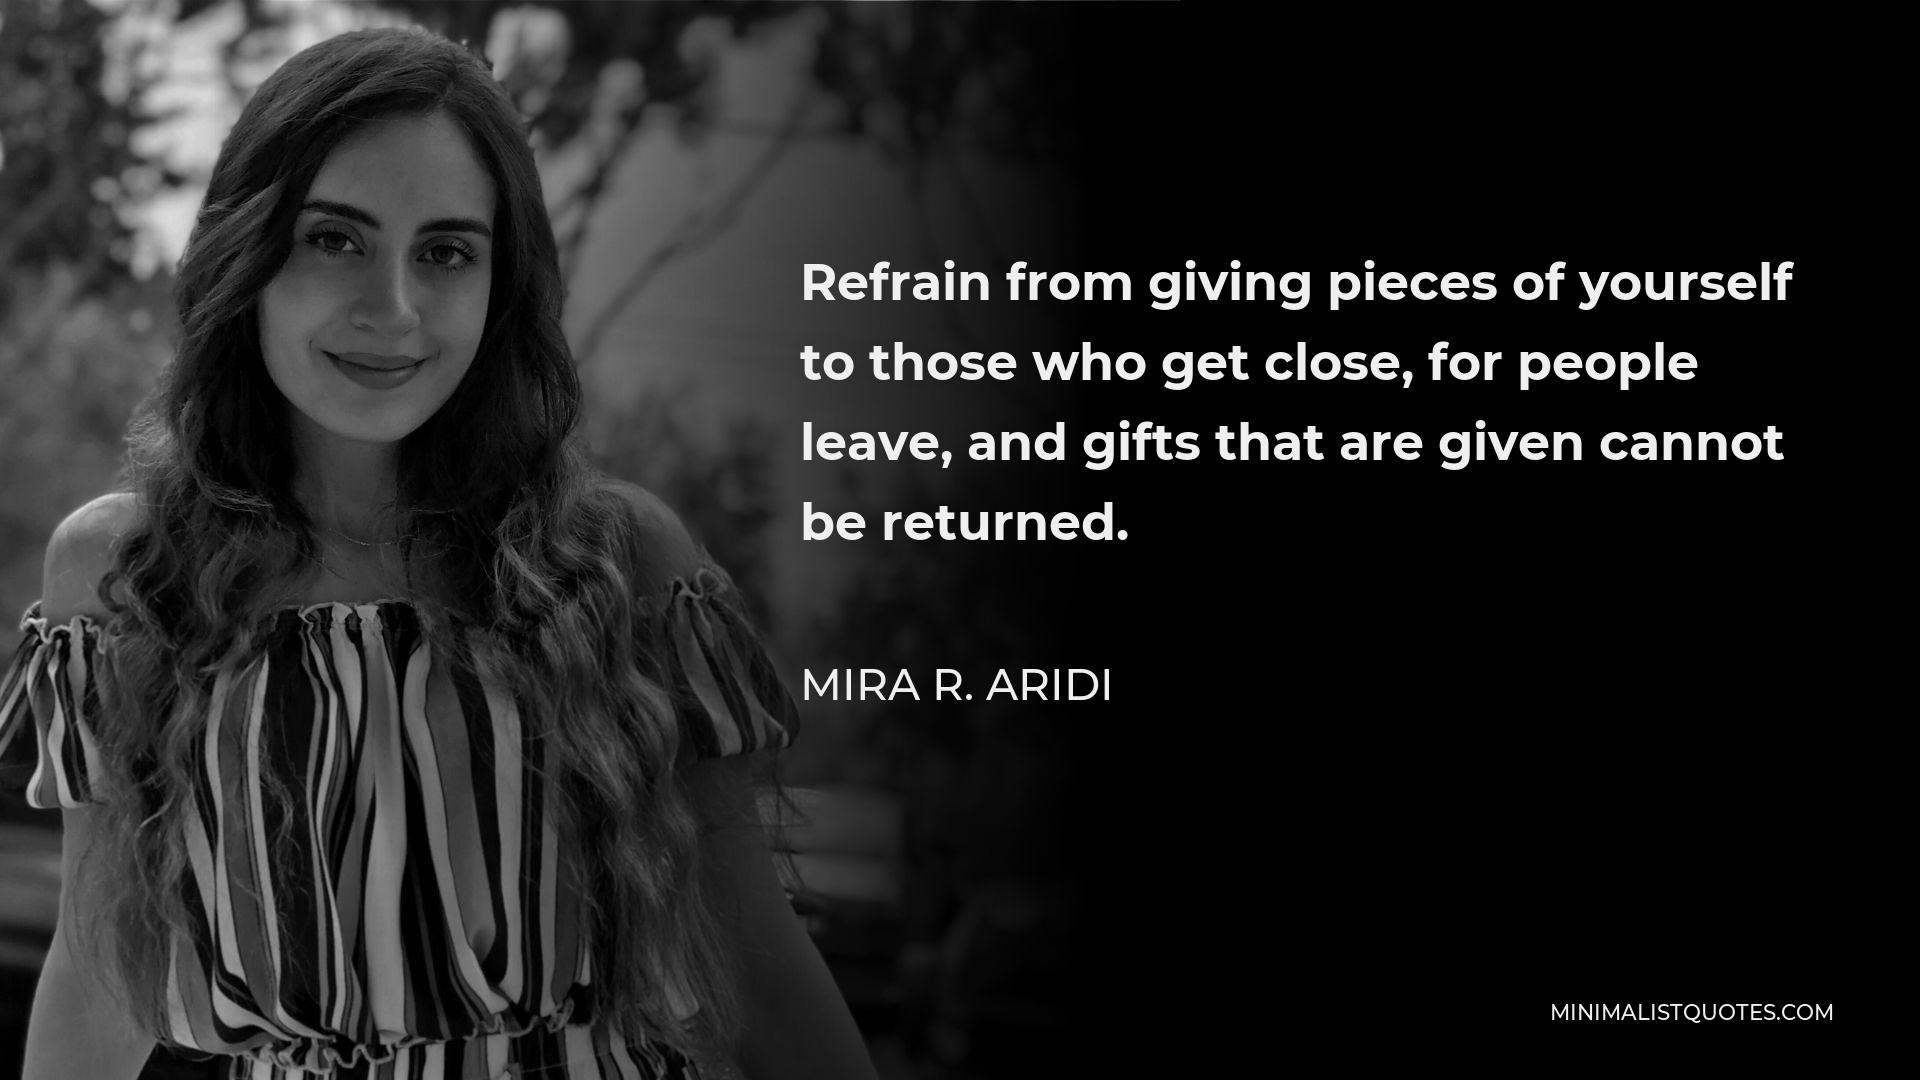 Mira R. Aridi Quote - Refrain from giving pieces of yourself to those who get close, for people leave, and gifts that are given cannot be returned.